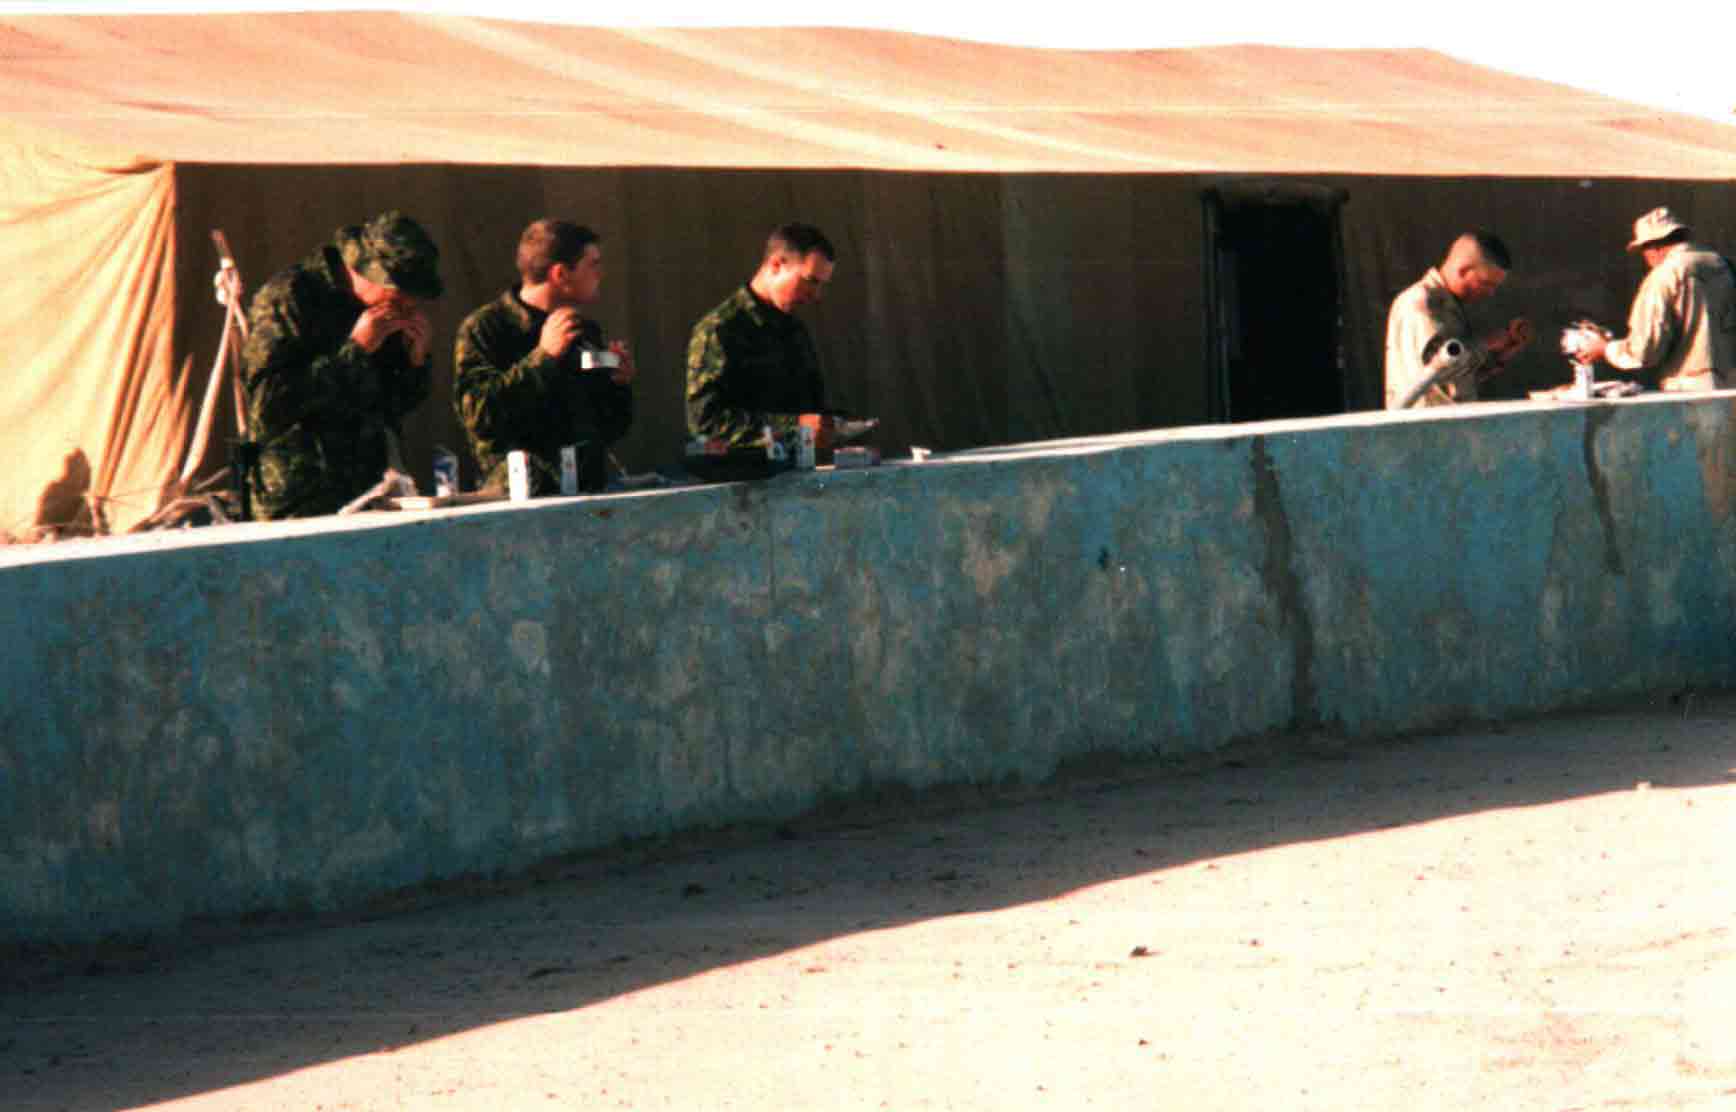 This is one for anyone out there who is familiar with the Boardwalk at Kandahar Air Field. It shows the dining facilities at the base in early 2002. The tent covers a bare concrete pad. No tables and chairs for the fine diners of Task Force Rakkasan.